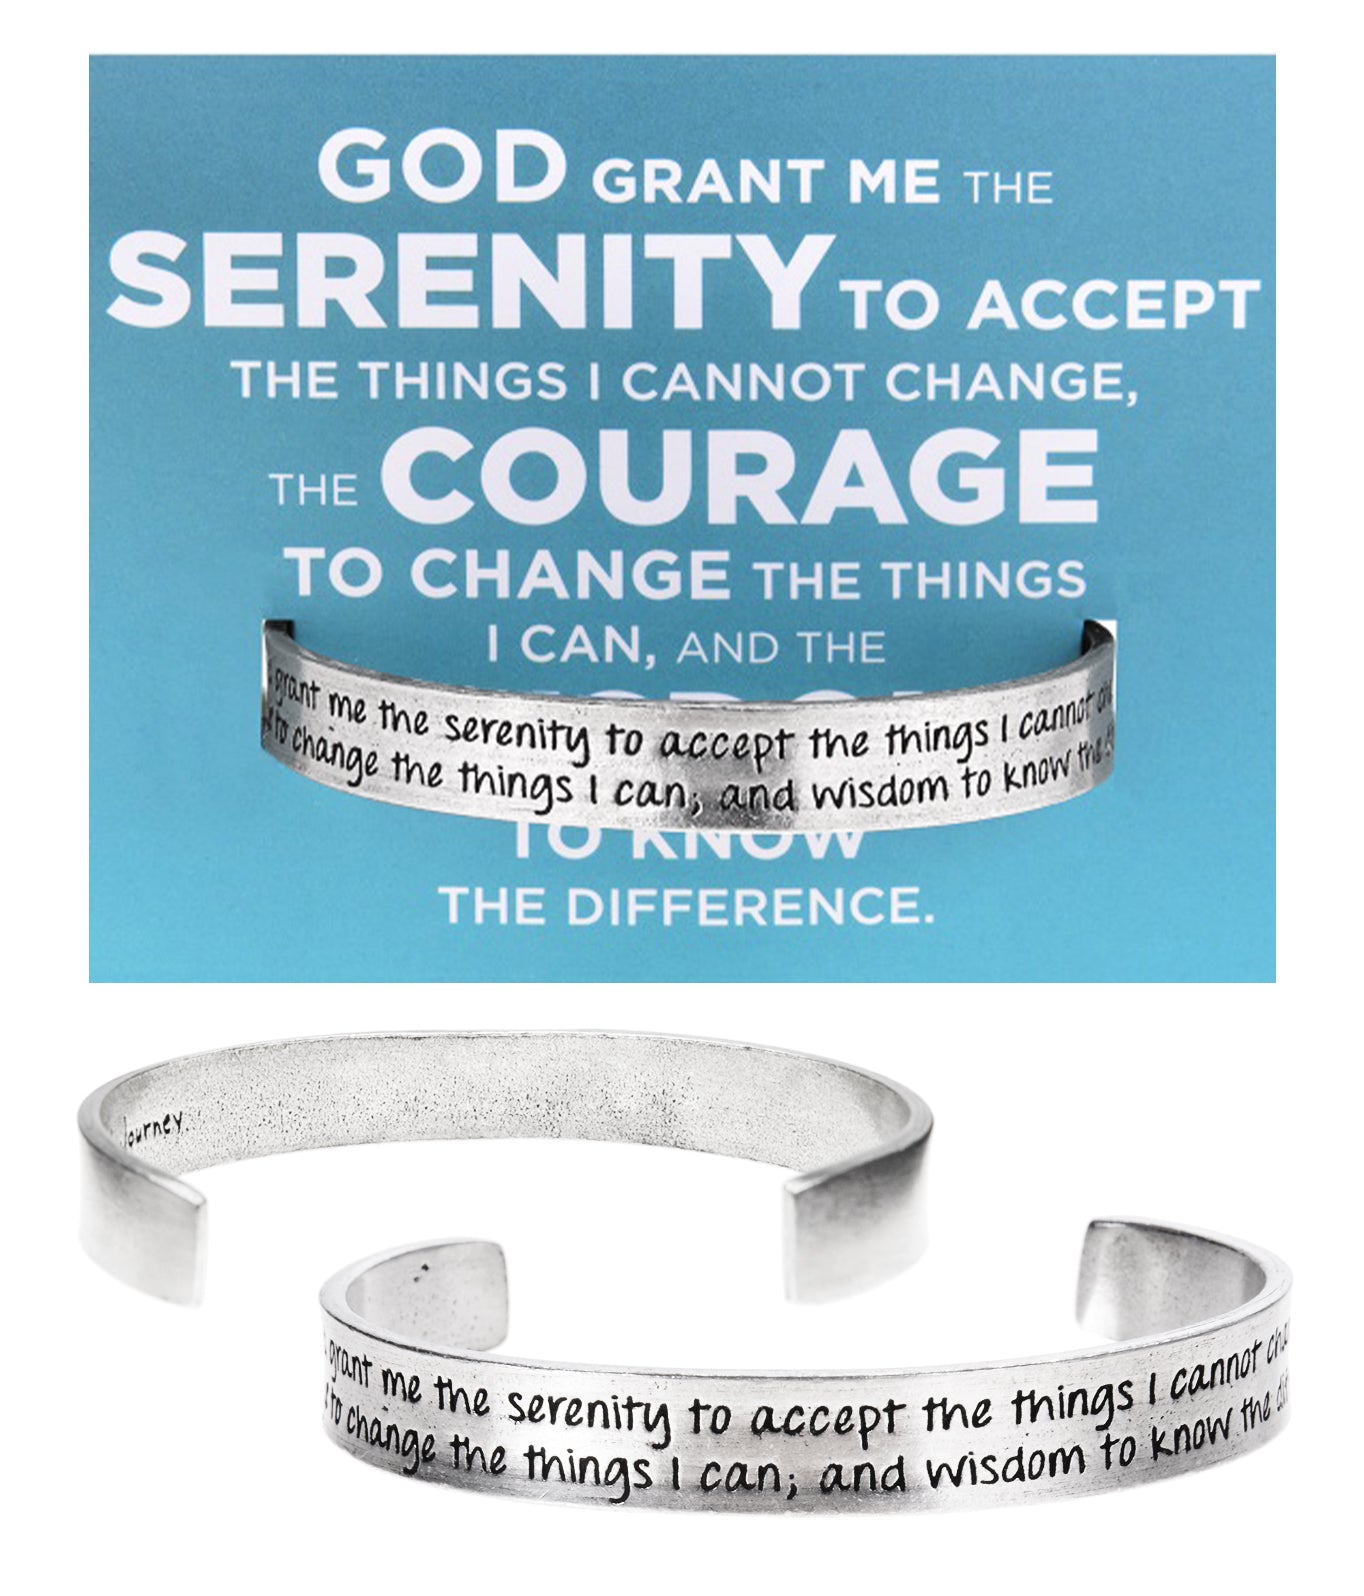 Serenity Prayer Bracelet Inspirational Engraved Pewter Quotable Cuffs Bracelet with backer card